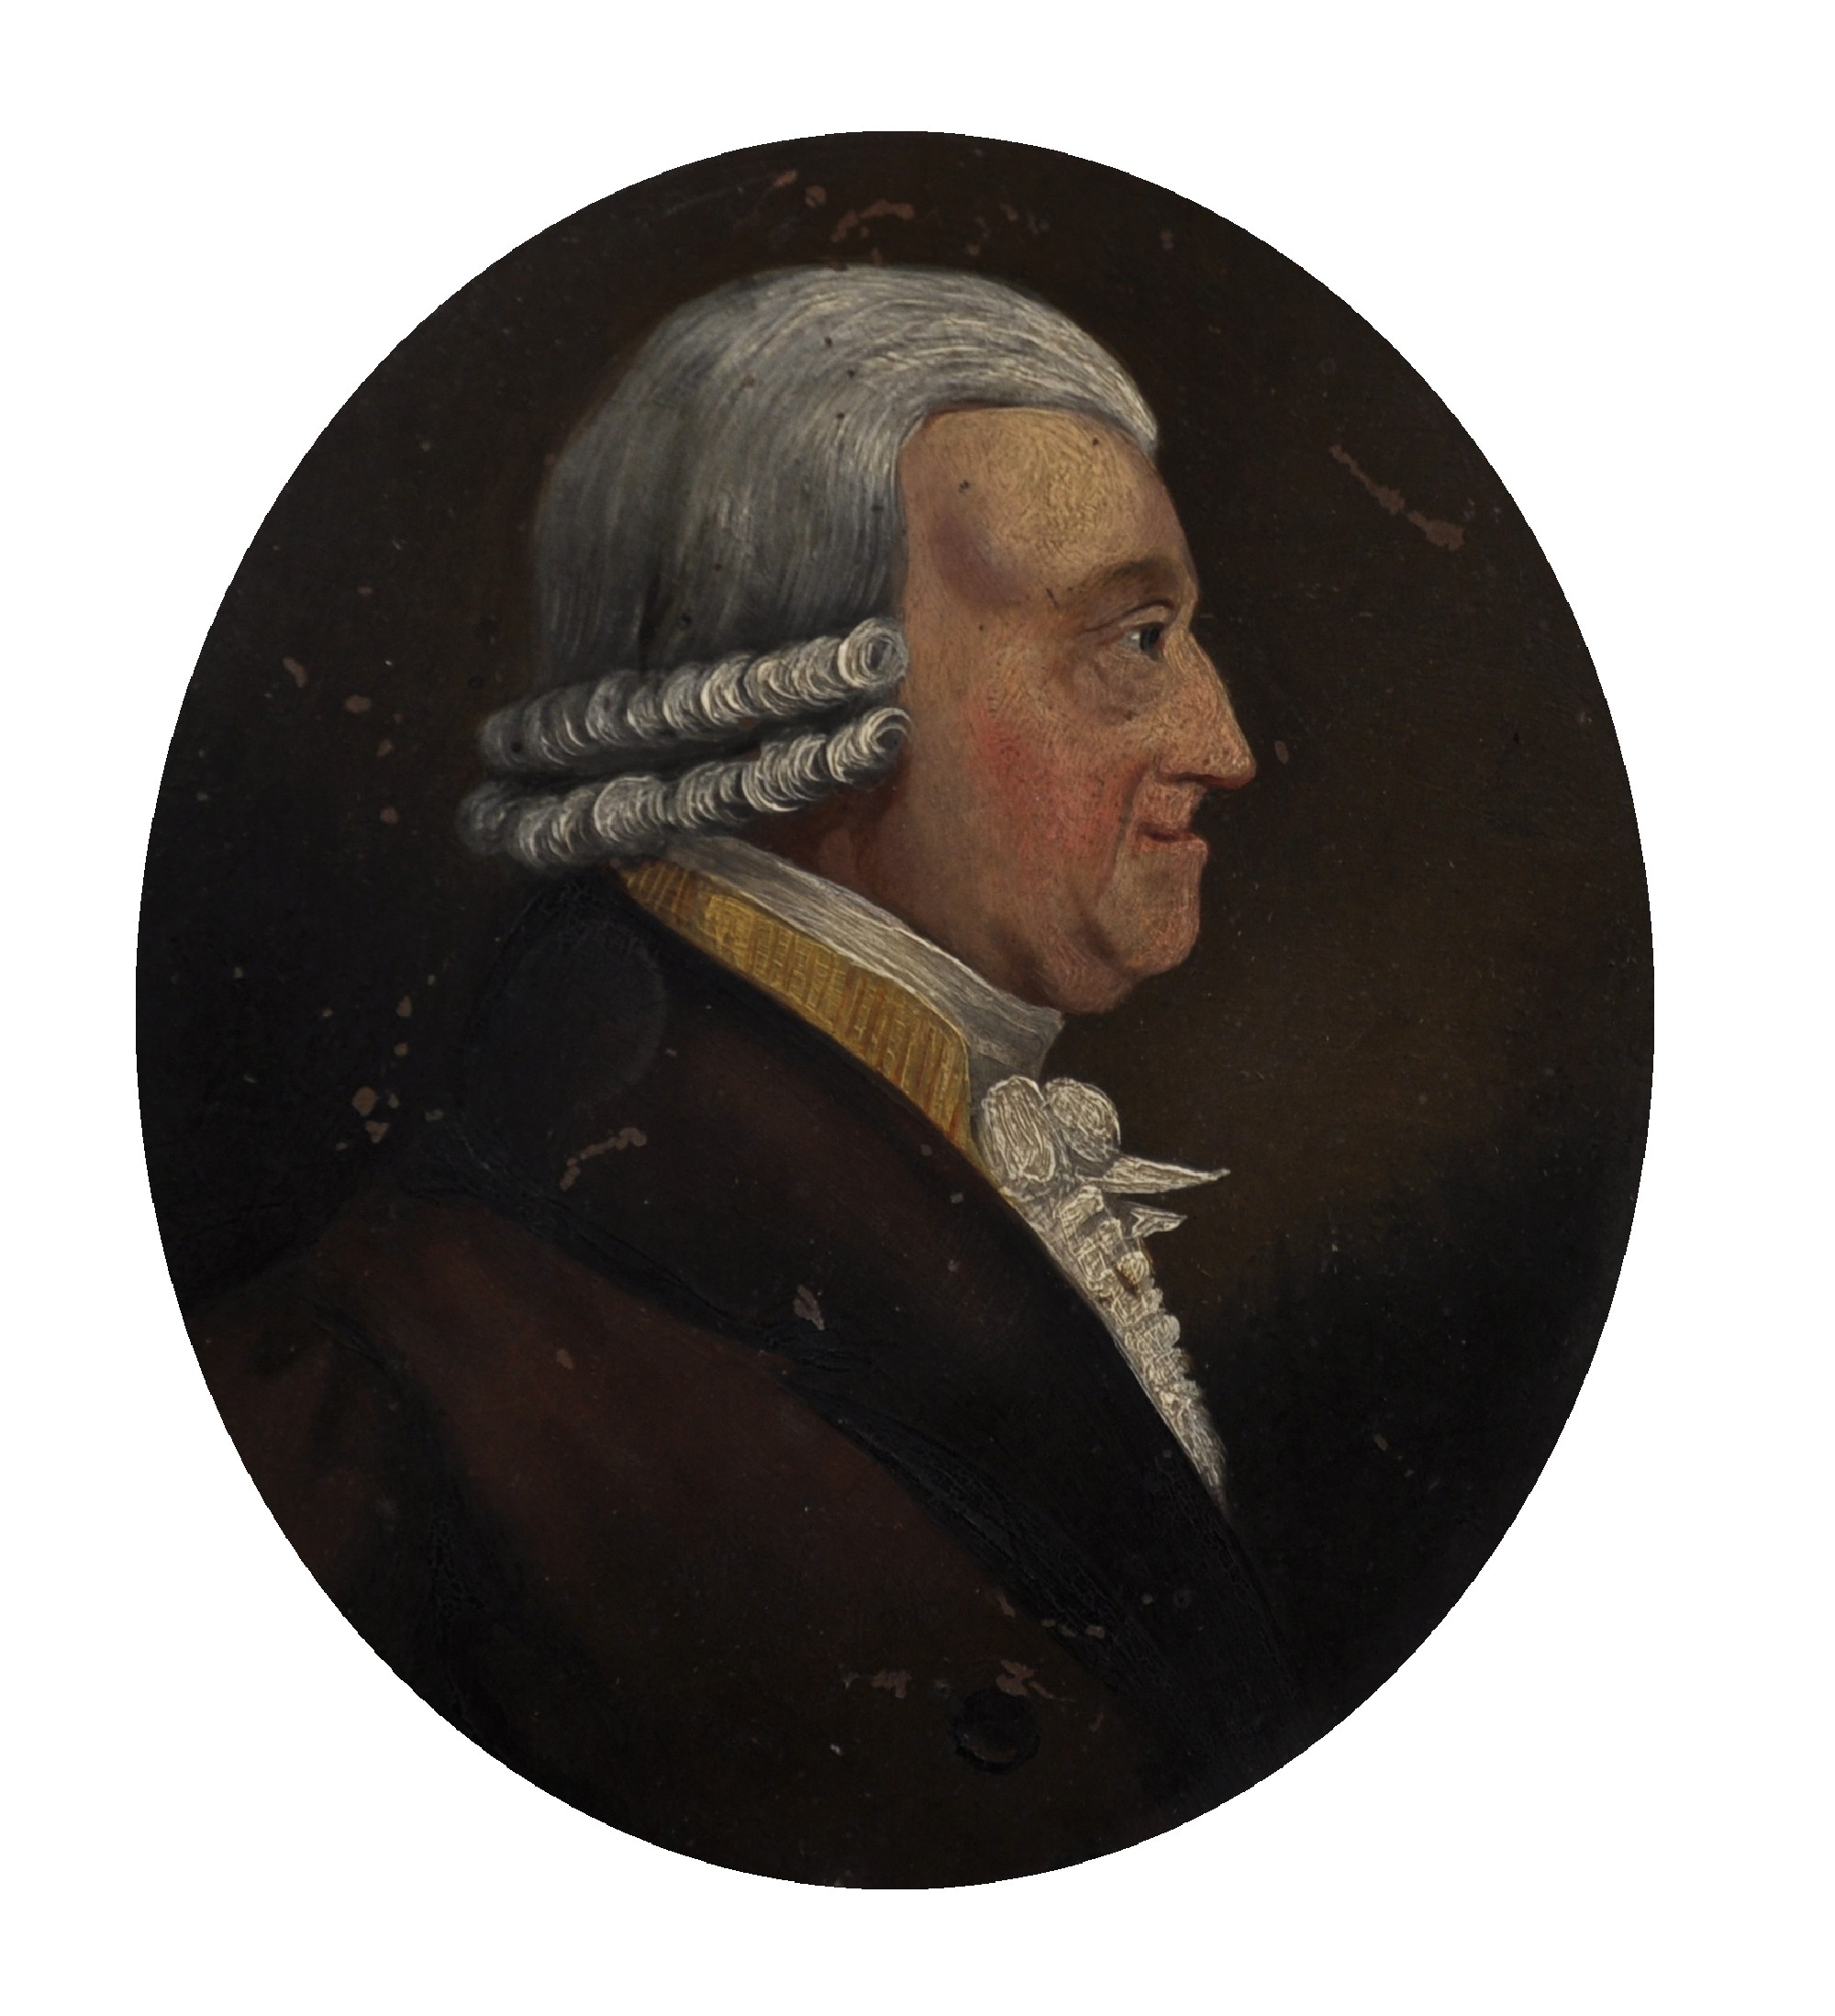 18th Century English School. A Bust Portrait of a Wigged Man, Oil on Copper, Oval, 5.25" x 4.5".